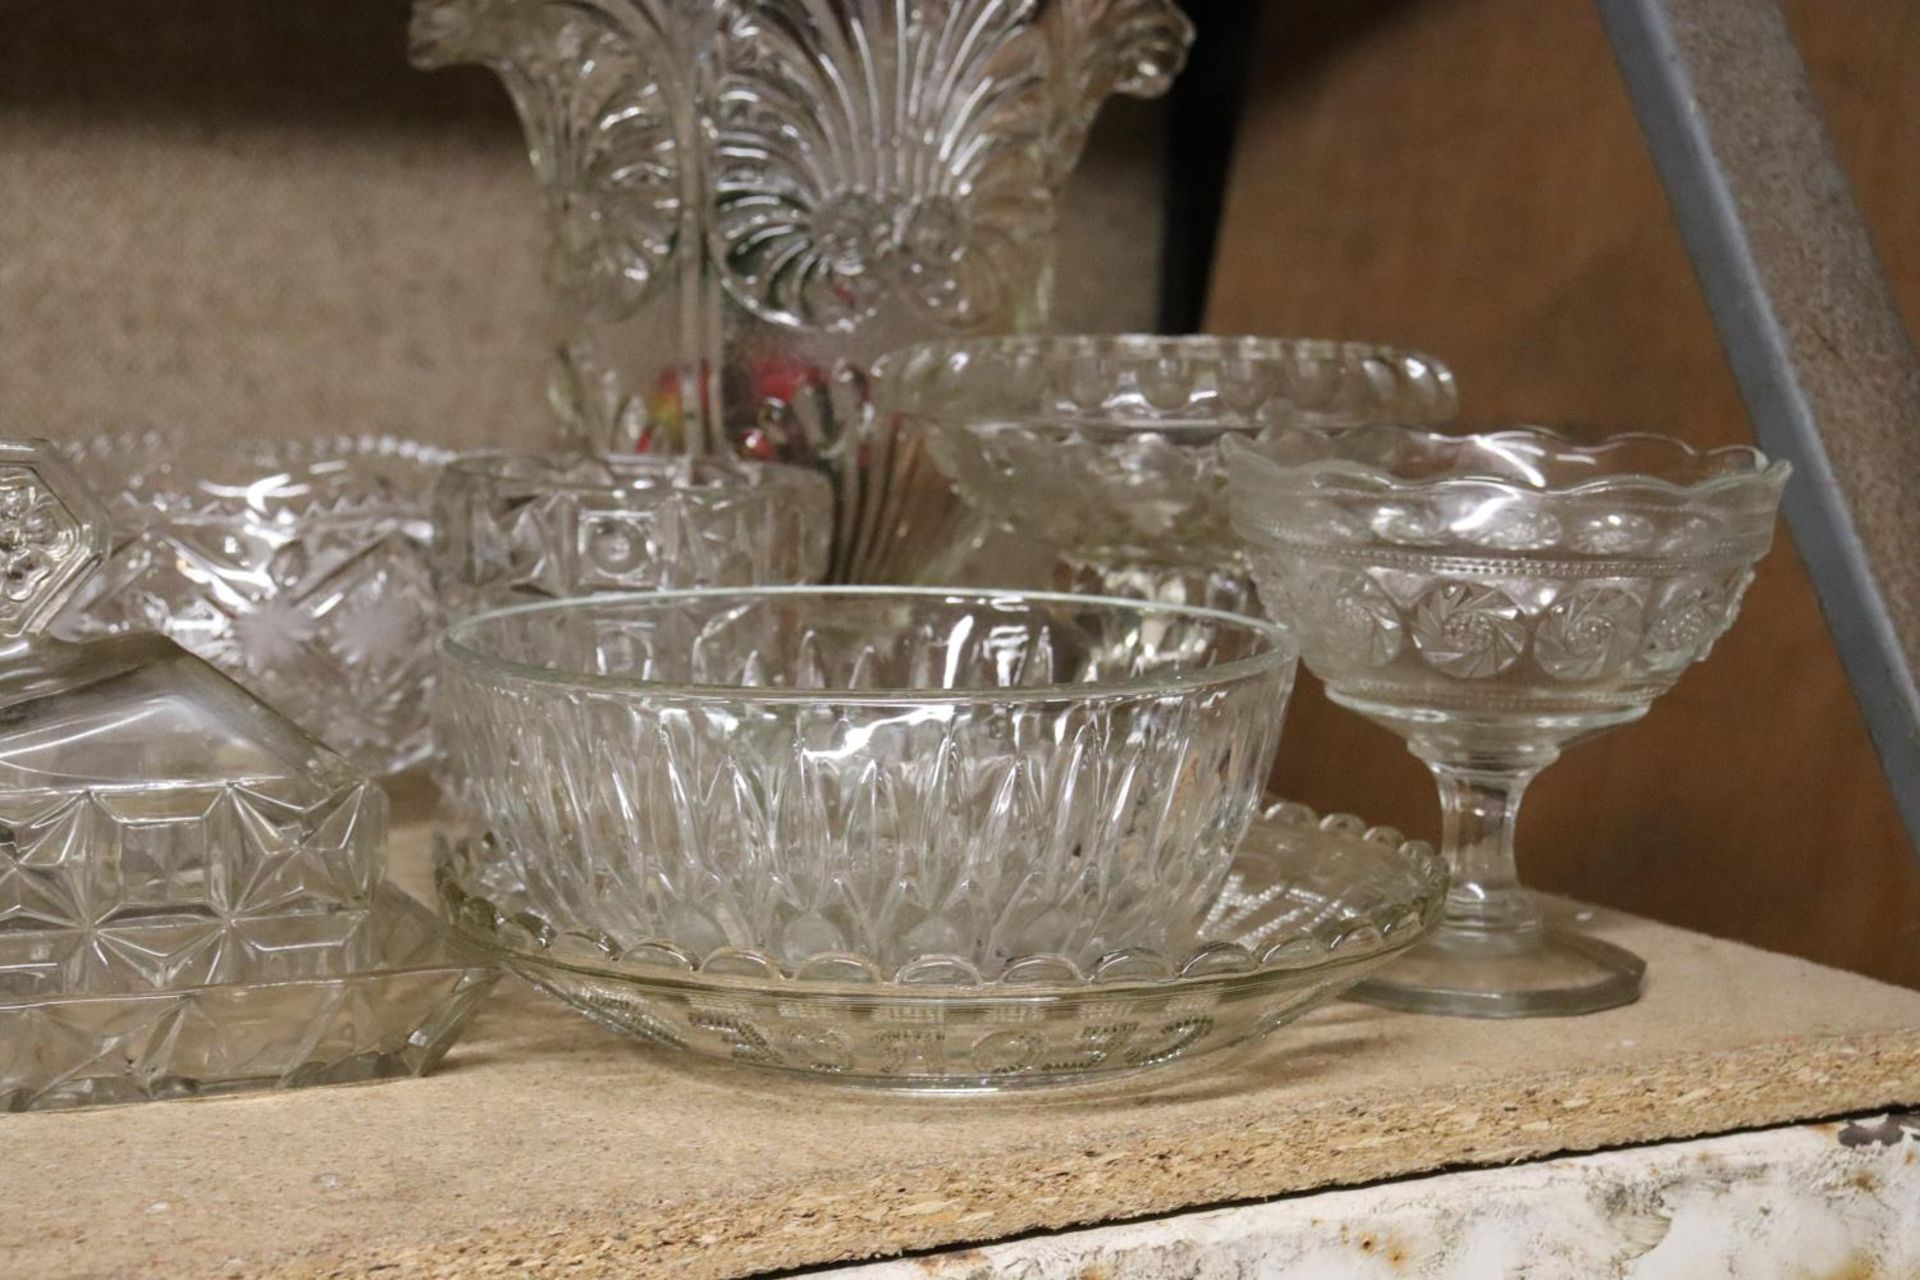 A QUANTITY OF GLASSWARE TO INCLUDE A LARGE VASE, BOWLS, FOOTED BOWLS, A CHEESE DISH, ETC - Image 5 of 5